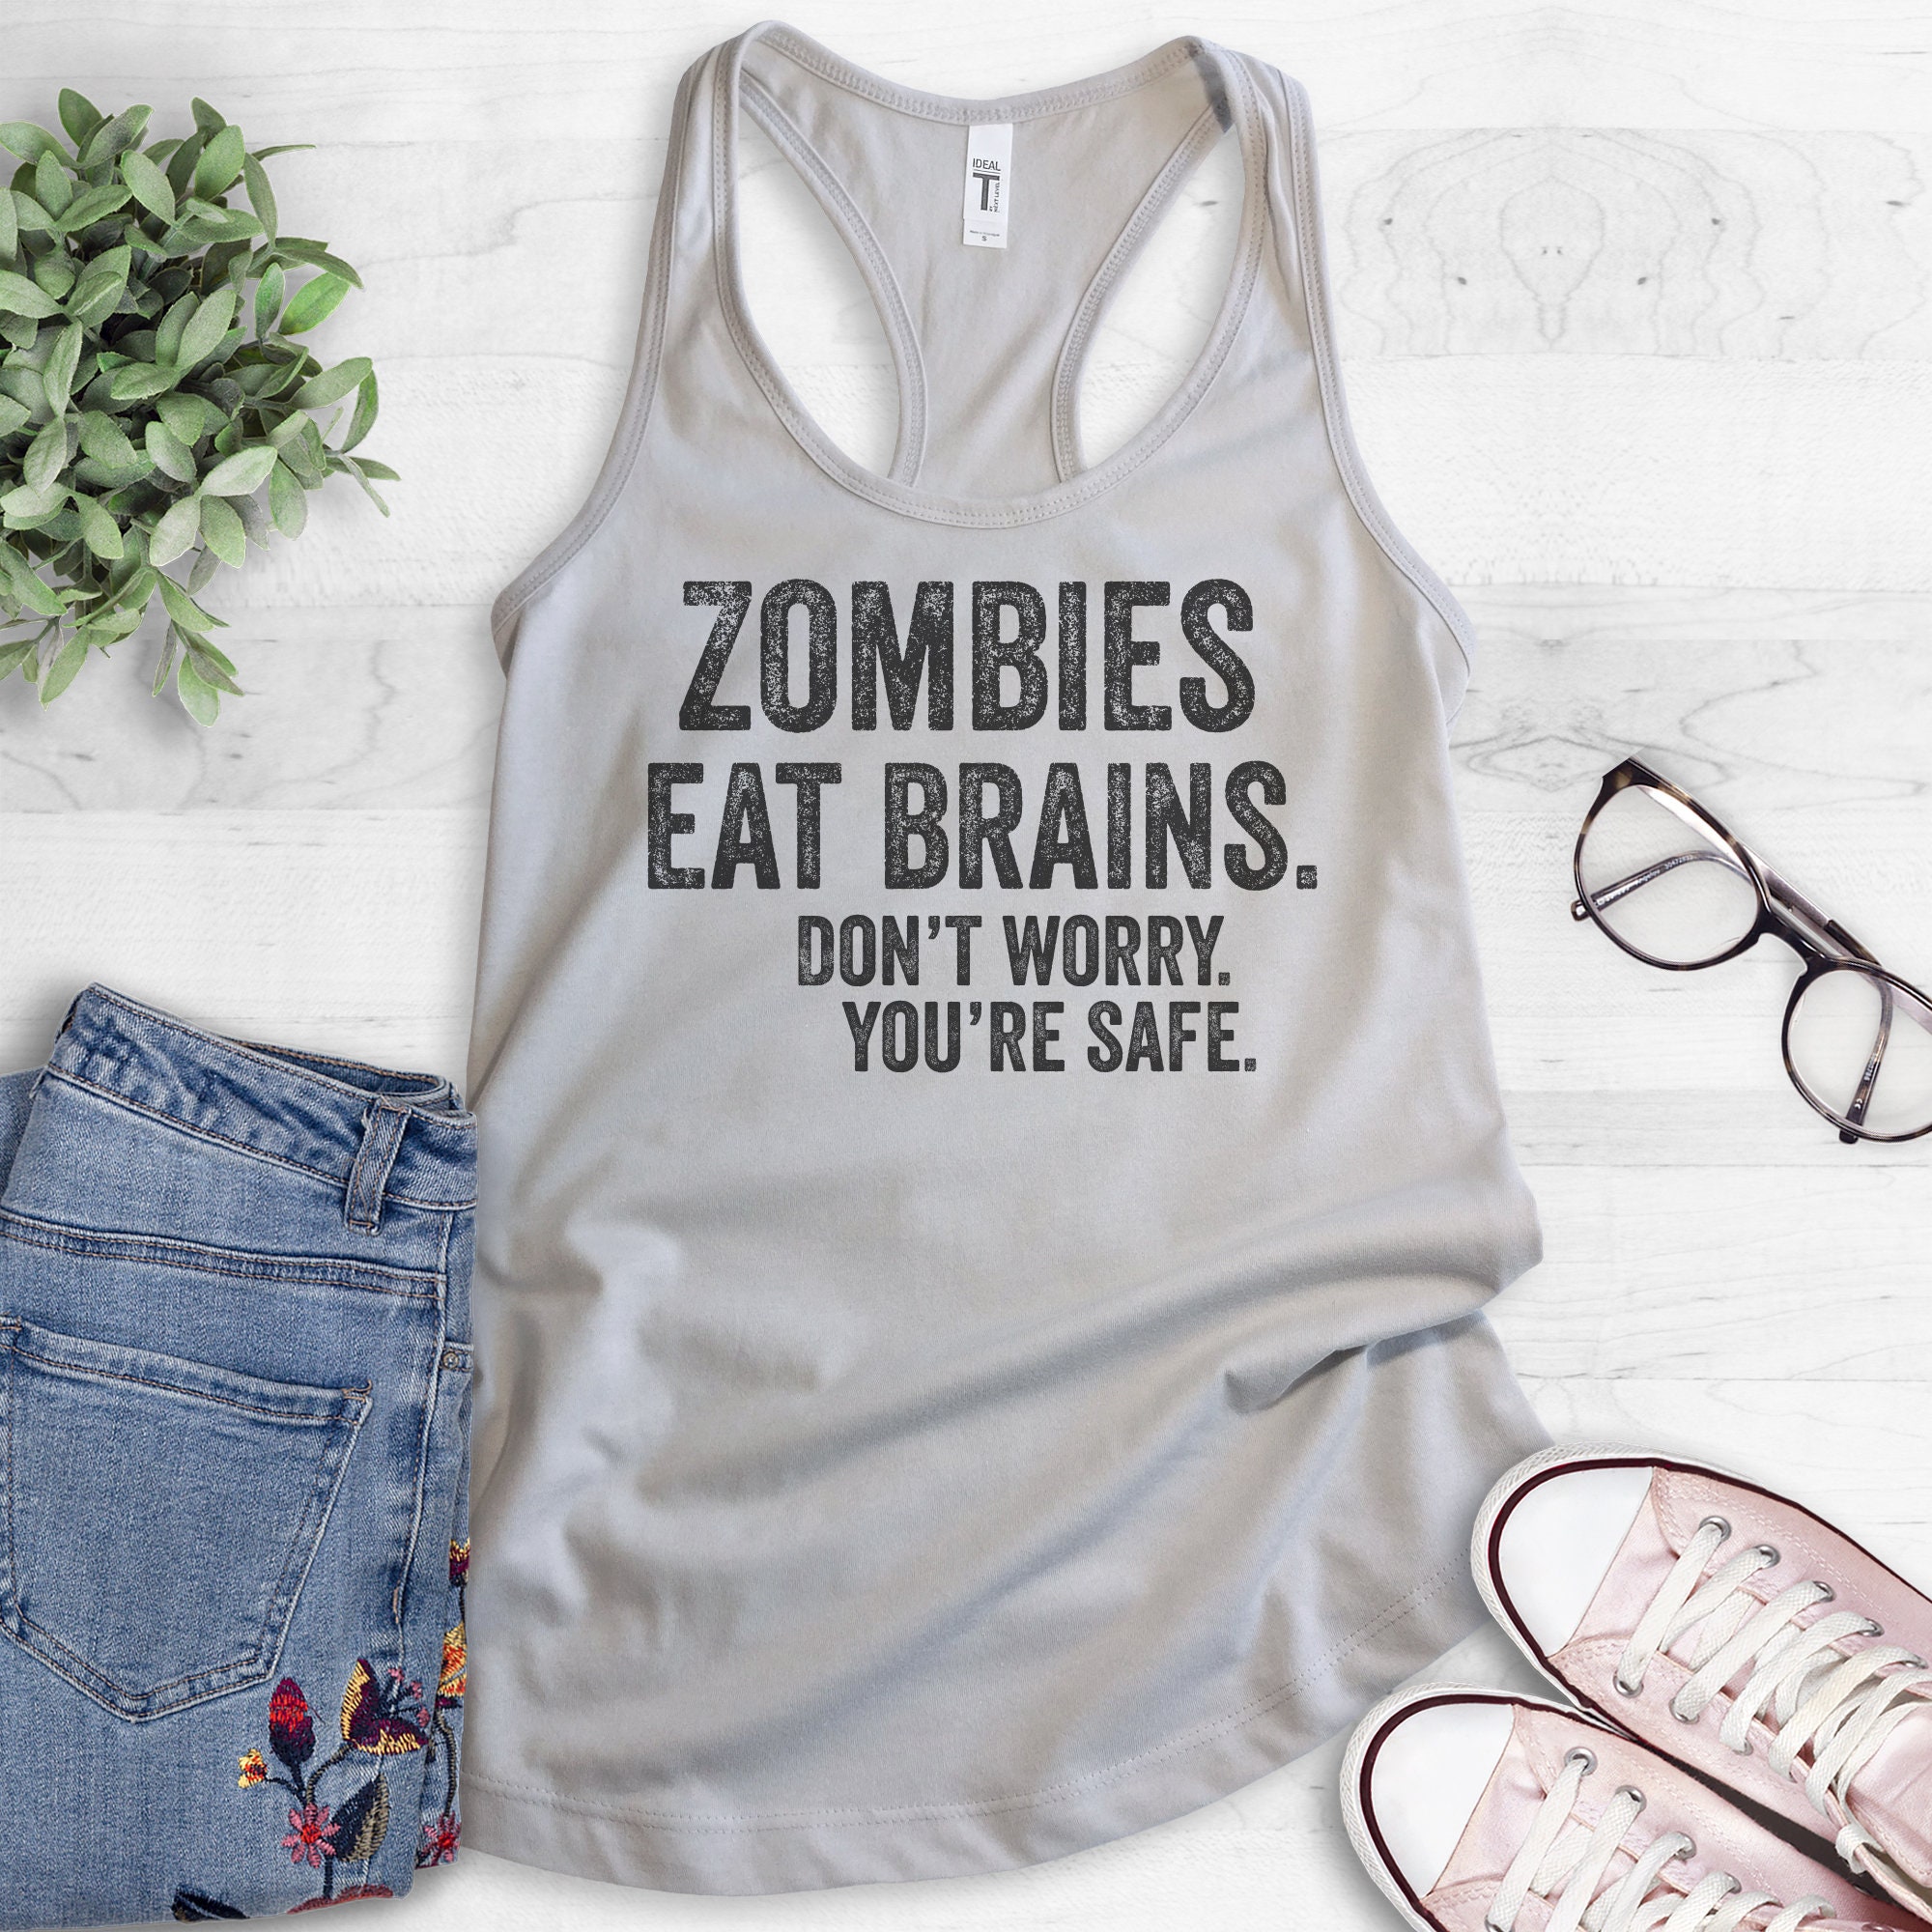 Mad Over Shirts If I Become A Zombie Ill Eat You Last Unisex Premium Tank Top